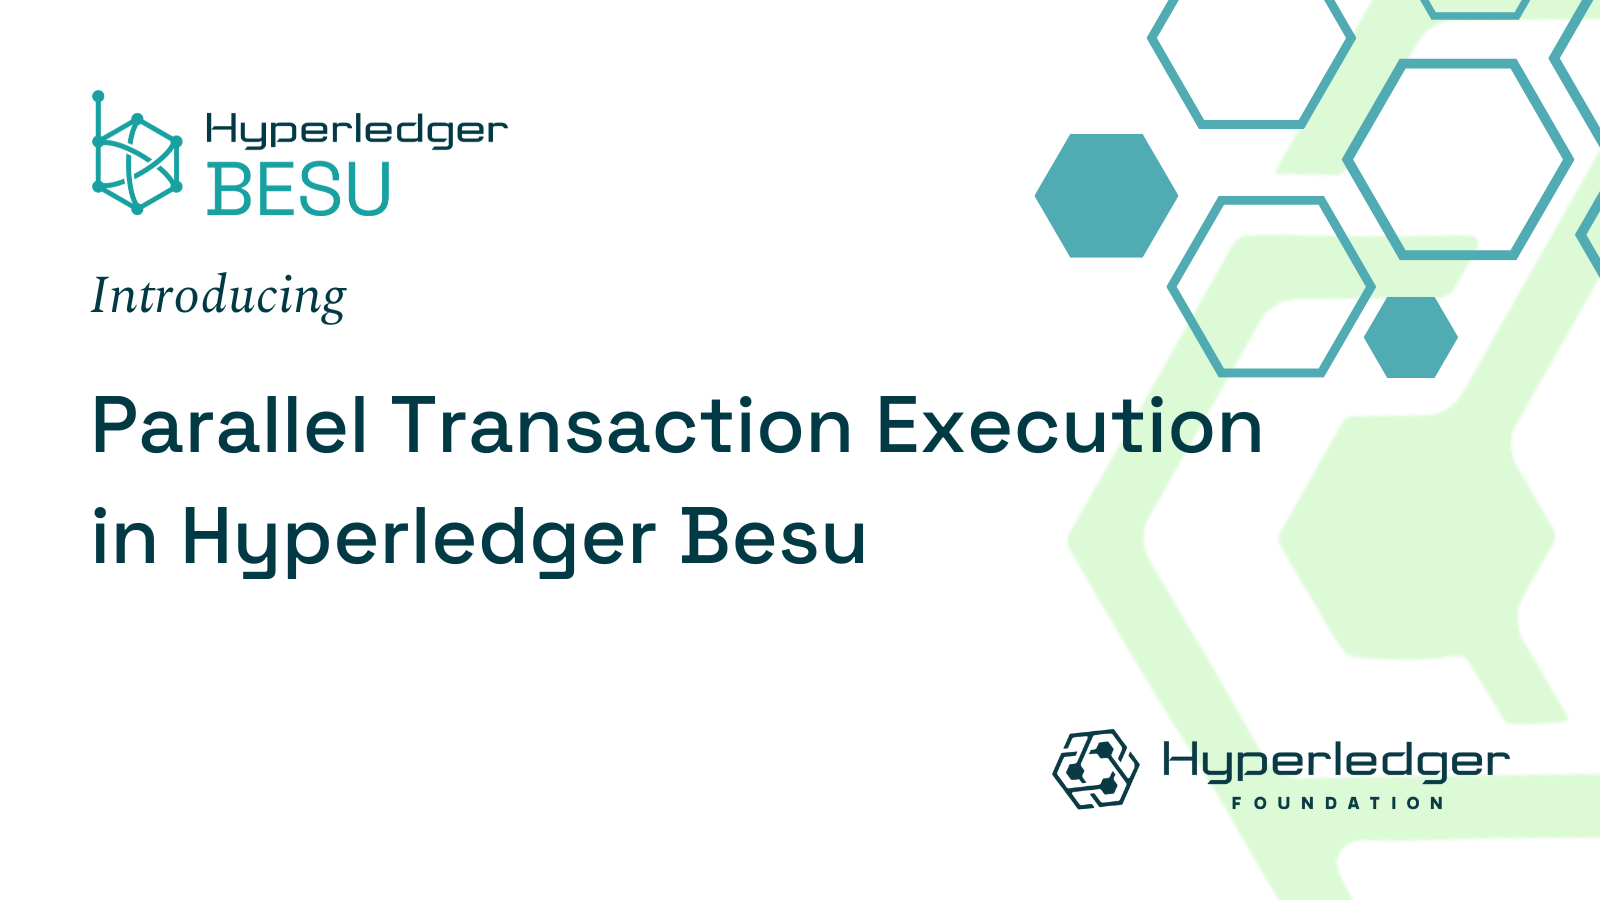 Introducing Parallel Transaction Execution in Hyperledger Besu